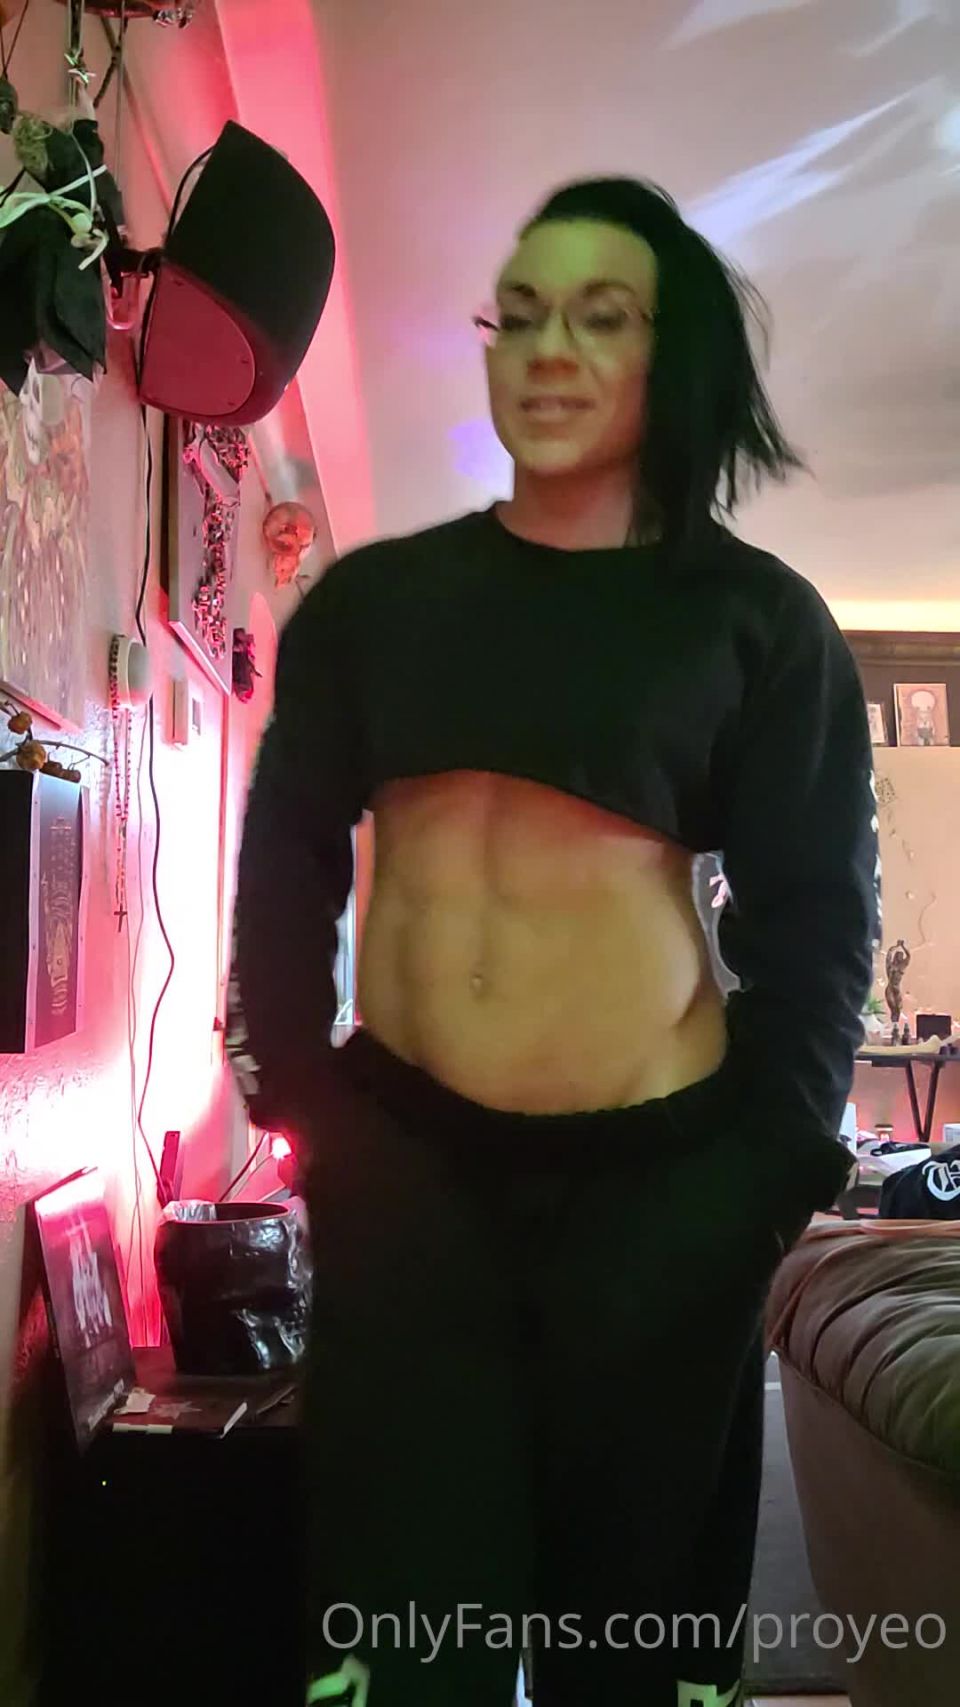 MuscleGeisha () Musclegeisha - youve been watching that muscular girl at the gym shes about to head home and comes ou 08-05-2021